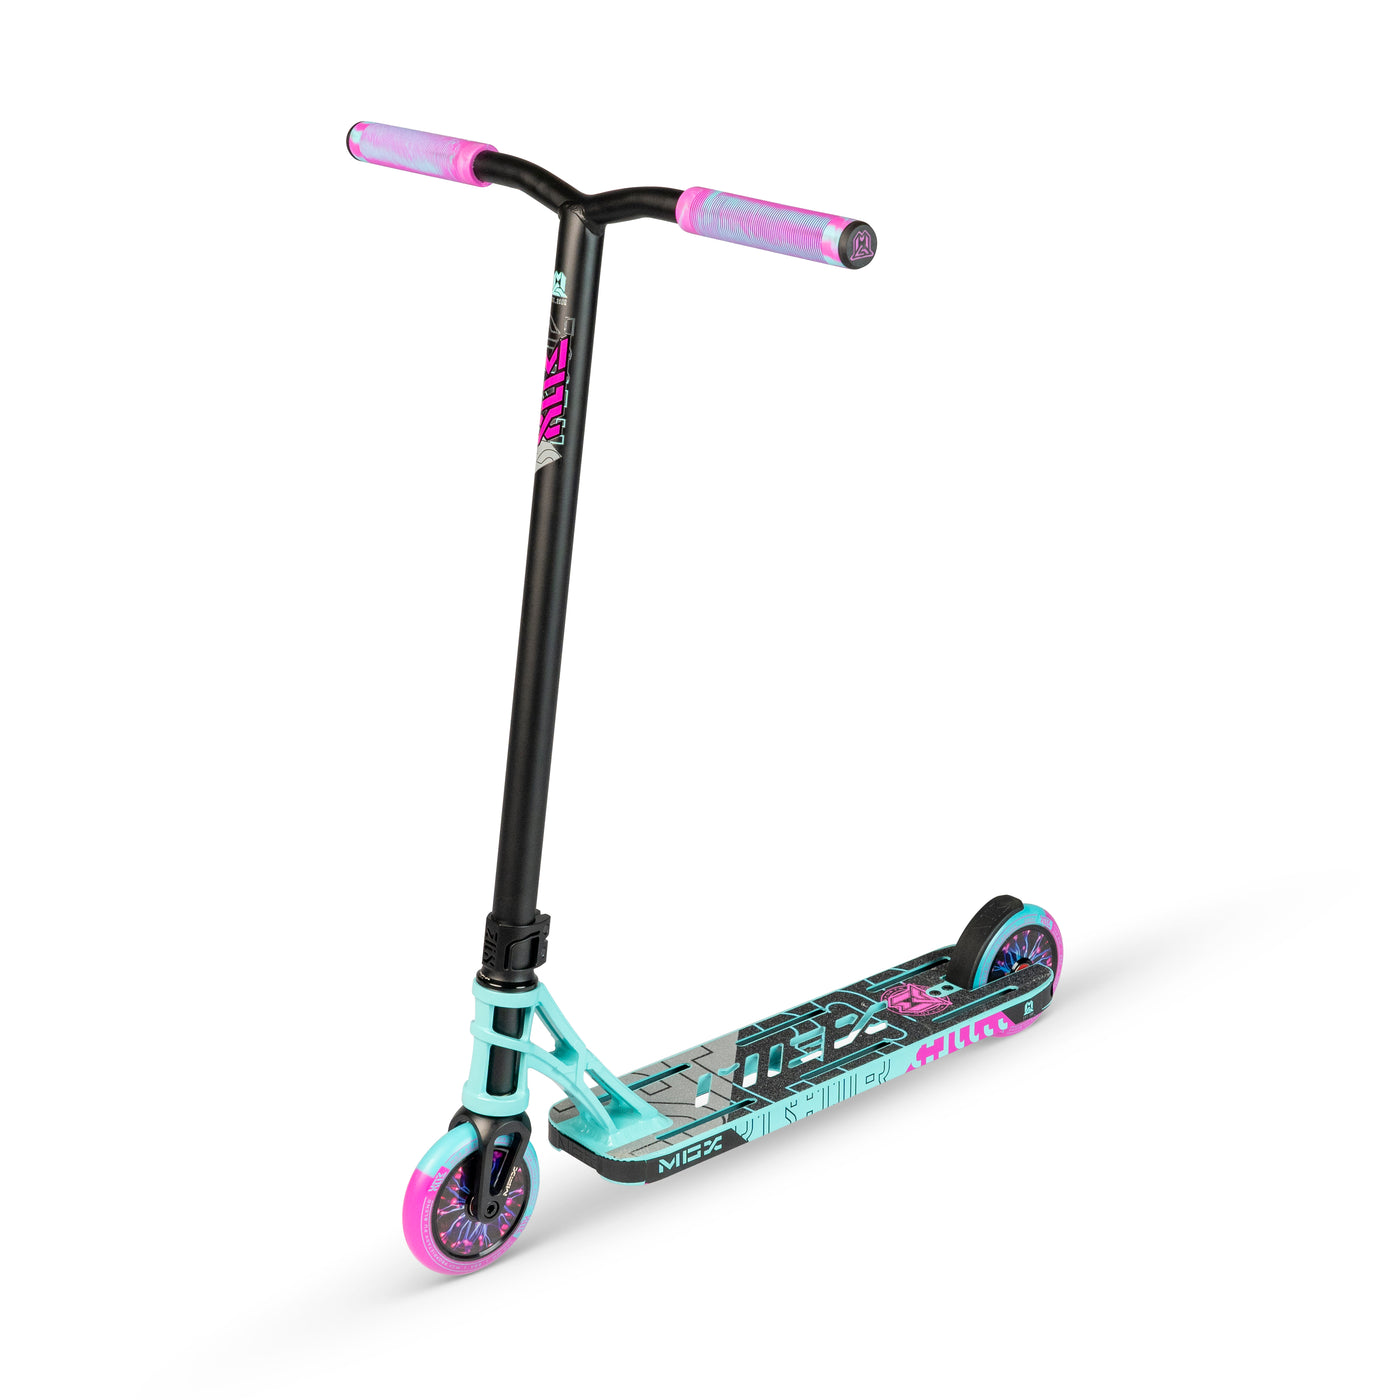 madd gear pro scooter complete teal pink one piece handlebar